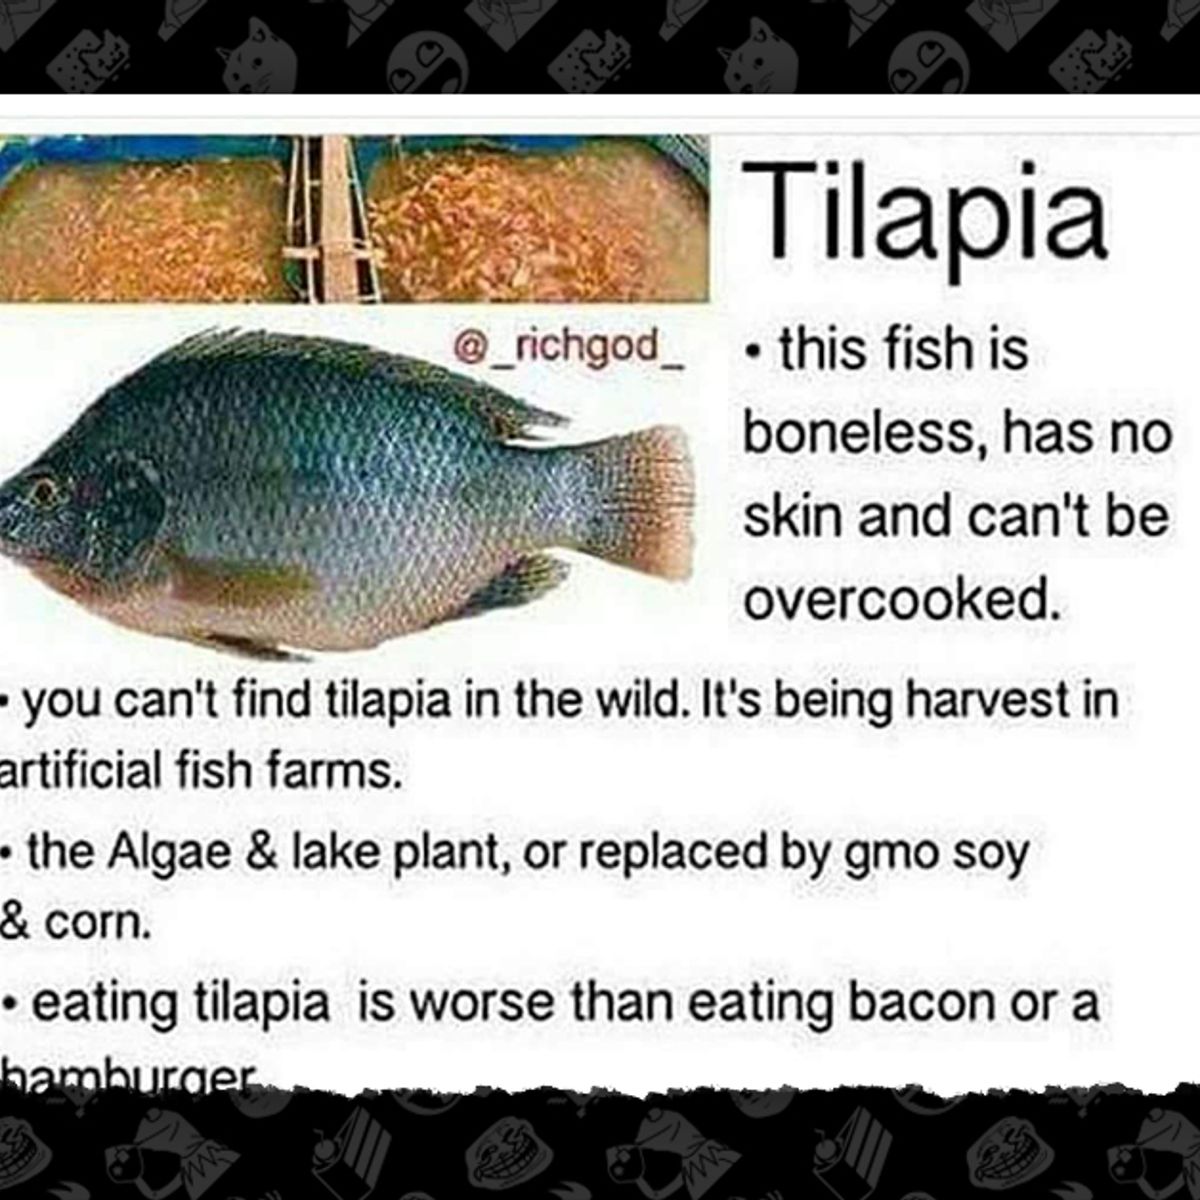 Is Tilapia a Boneless, Skinless 'Mutant' Fish That Is Unsafe to Eat?